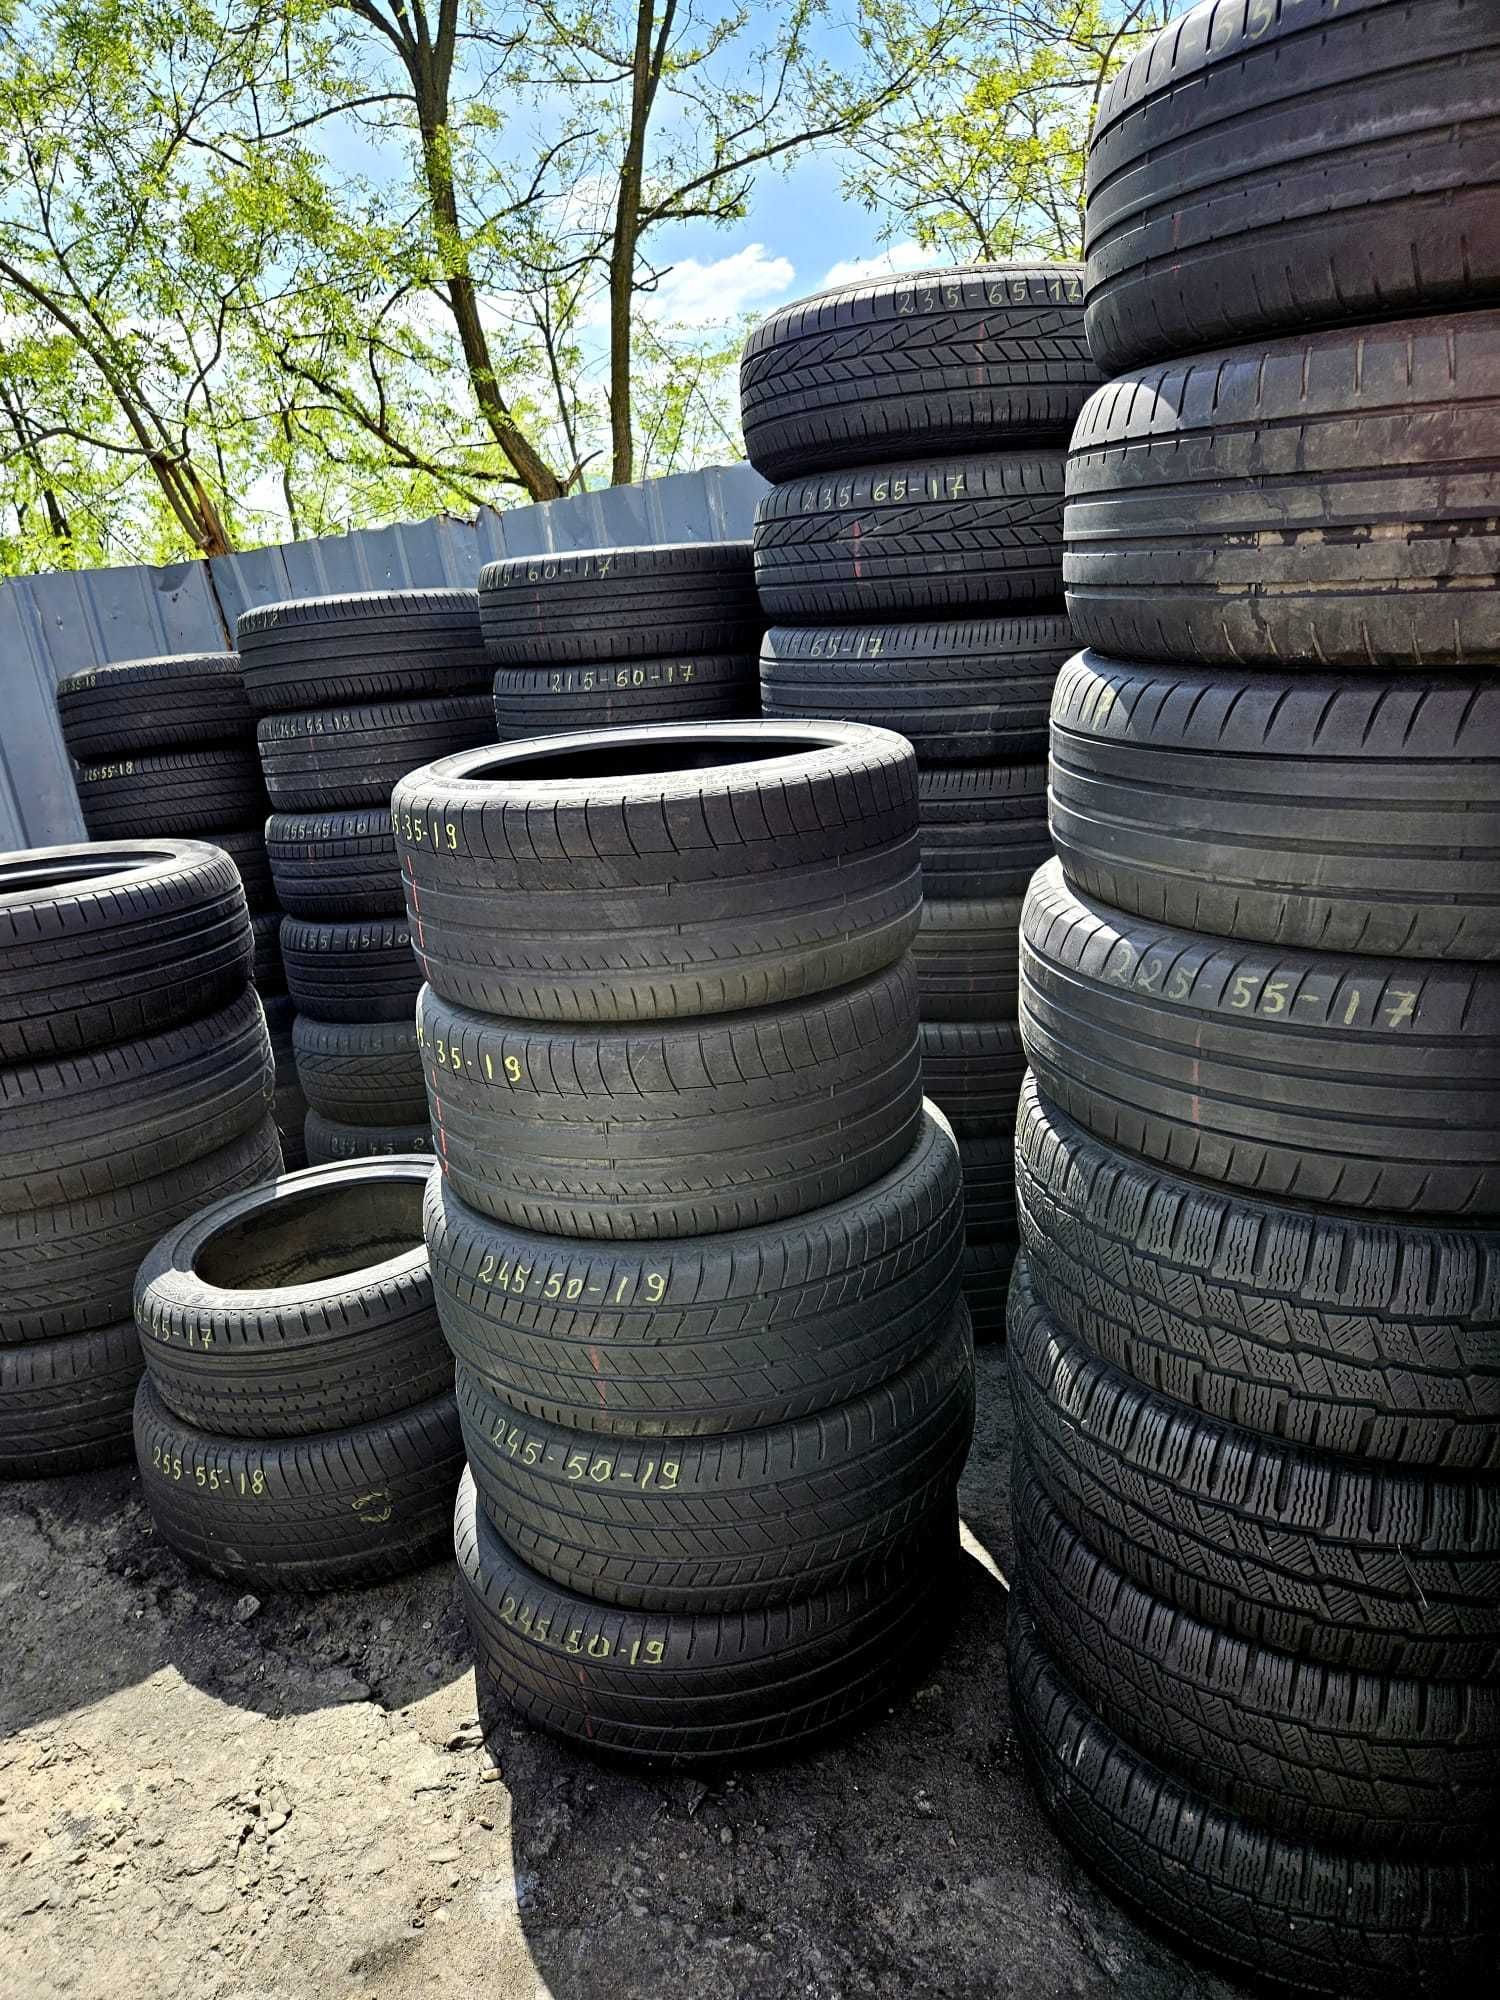 Anvelope Second Hand 205/55R16 (in stoc si alte dimensiuni )